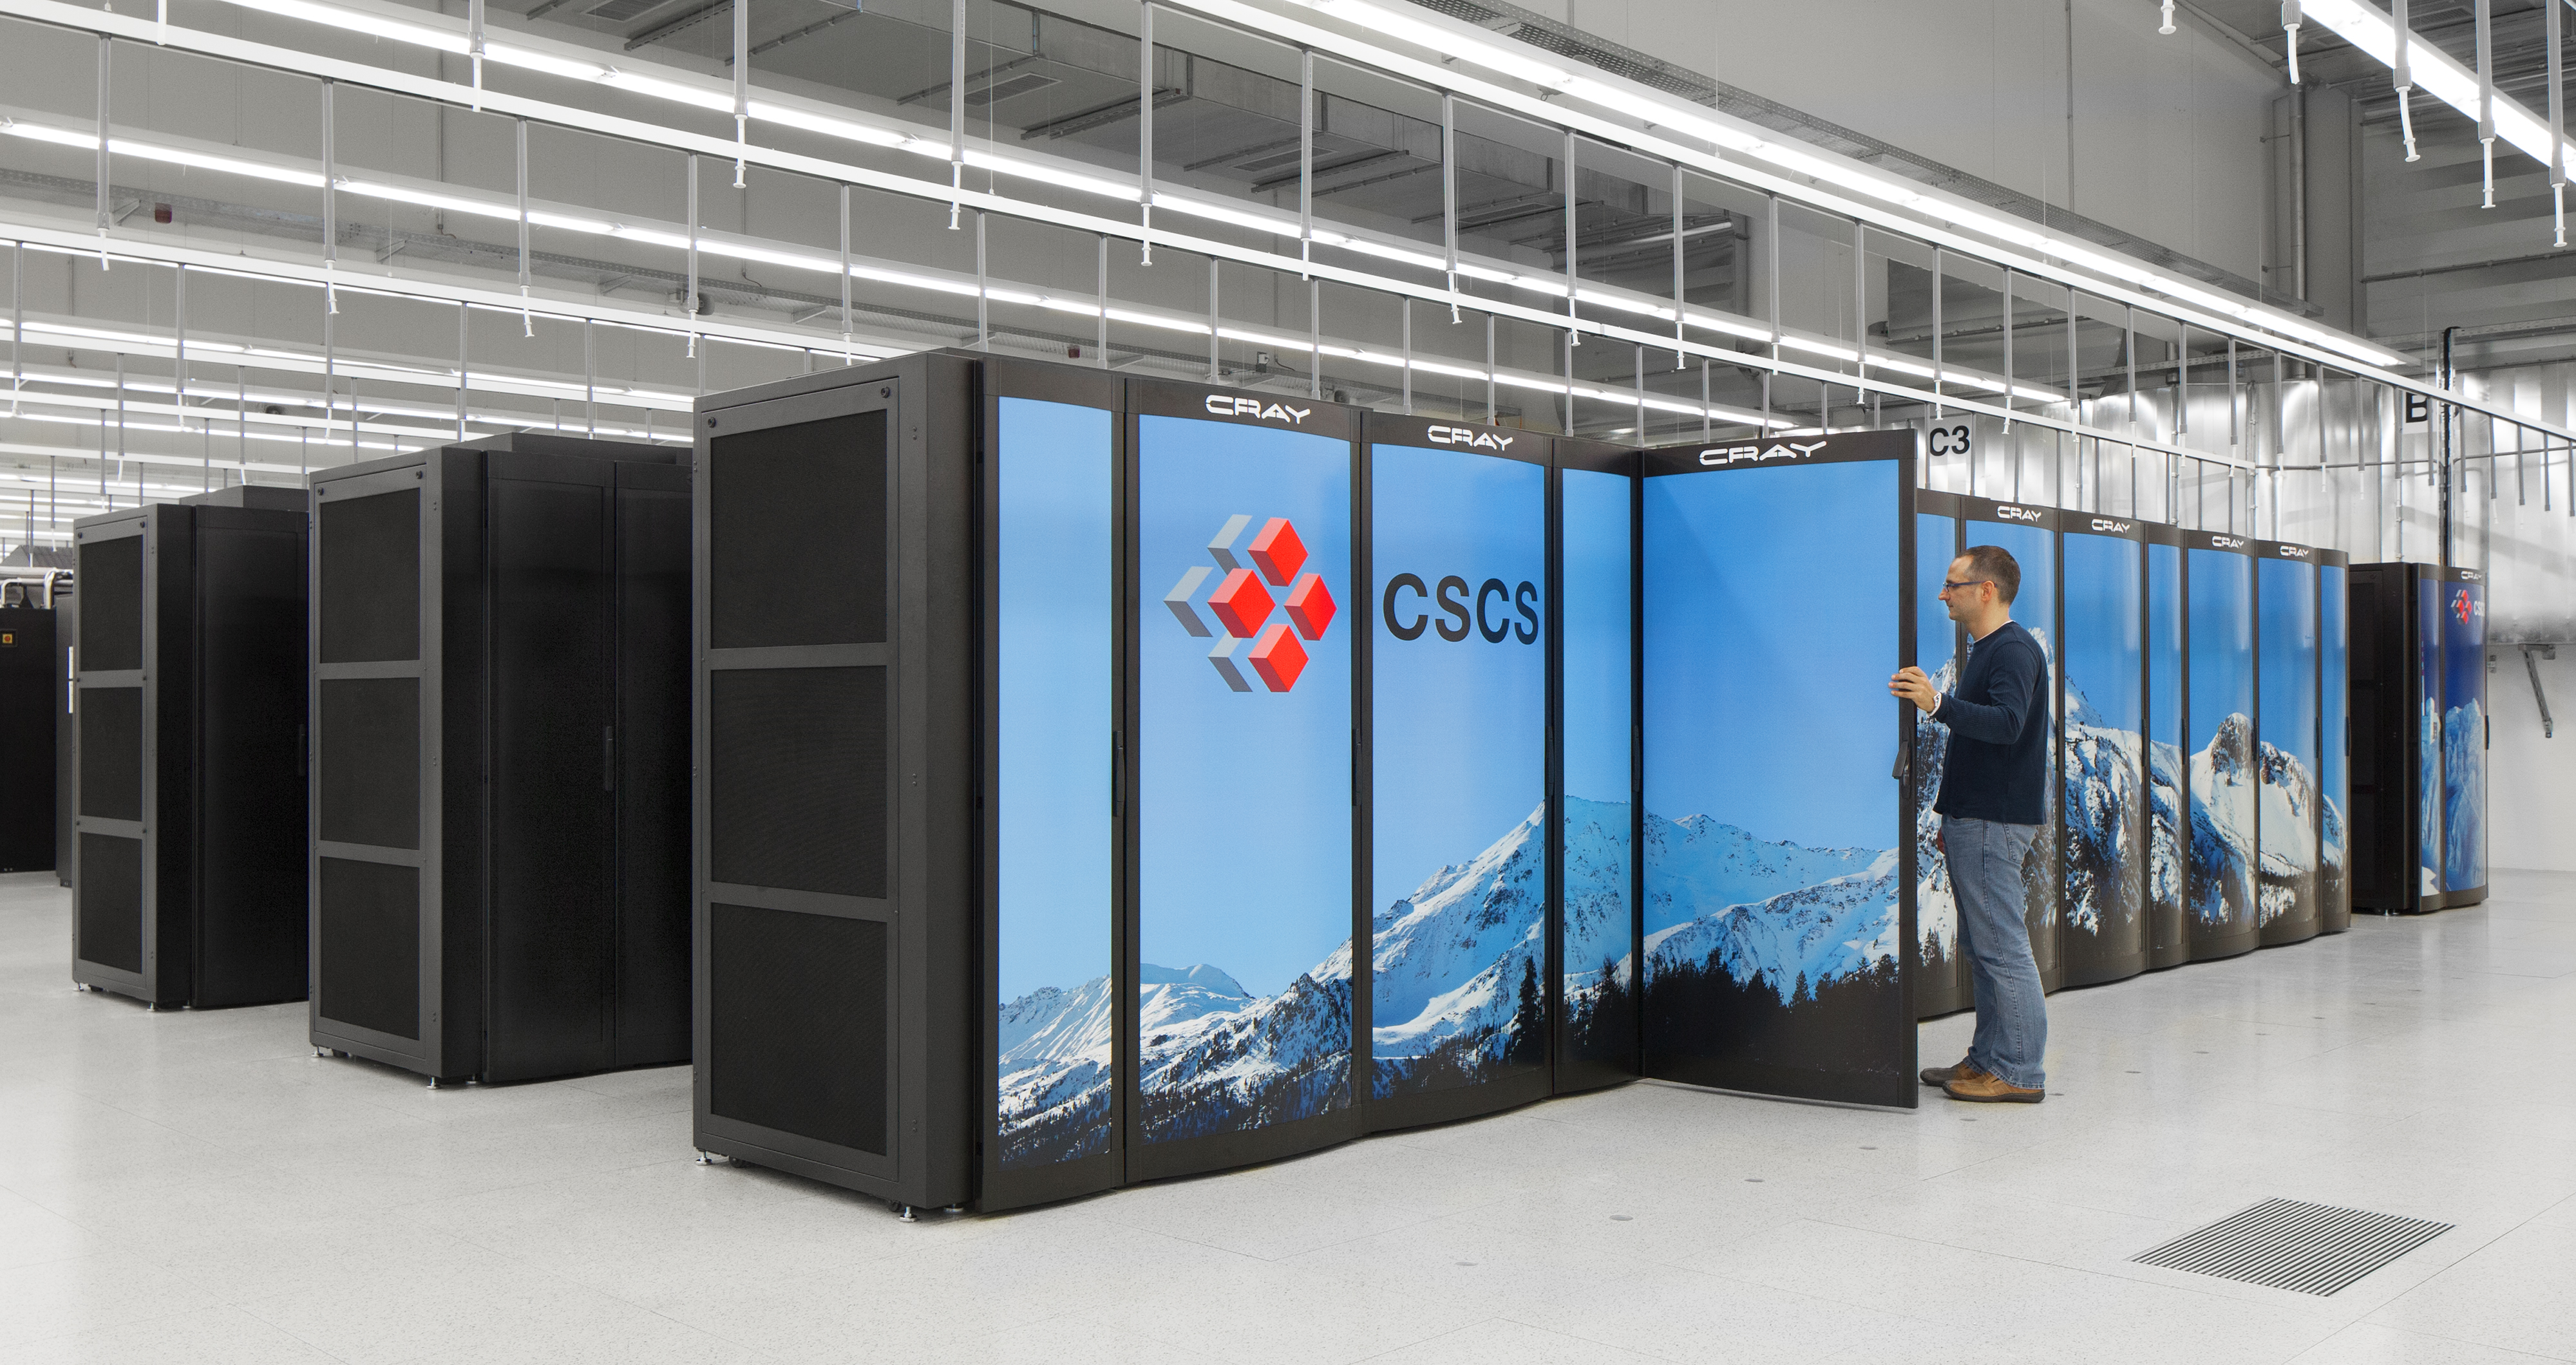 Piz Daint, the first supercomputer with sustained petaflops-scale performance in Switzerland